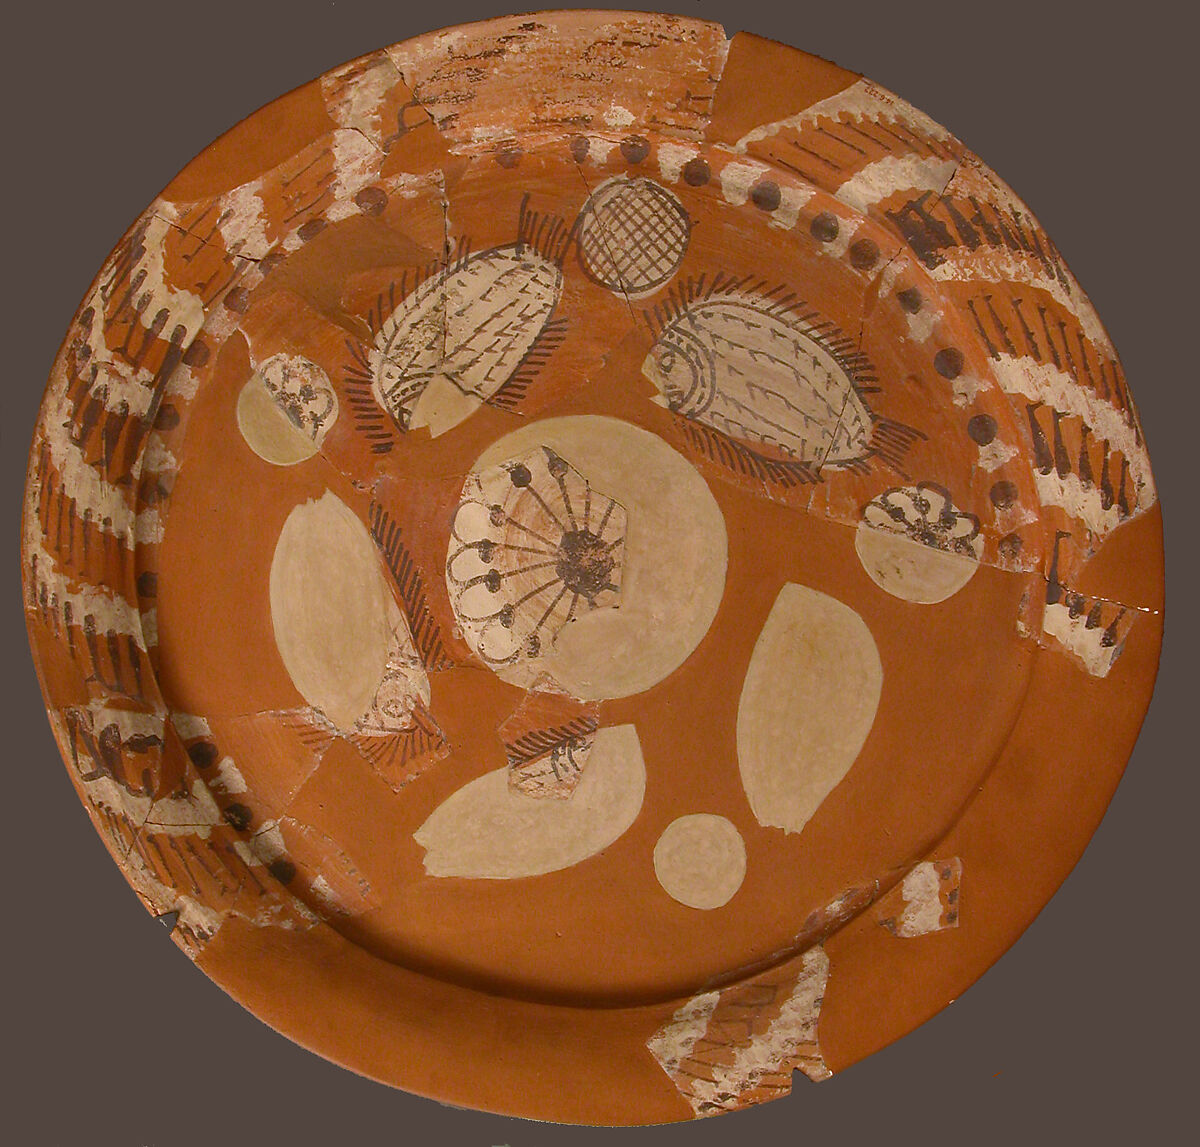 Fragmentary Platter with Fish and Rosettes, Terracotta decorated with red, white and dark brown slip, Coptic 